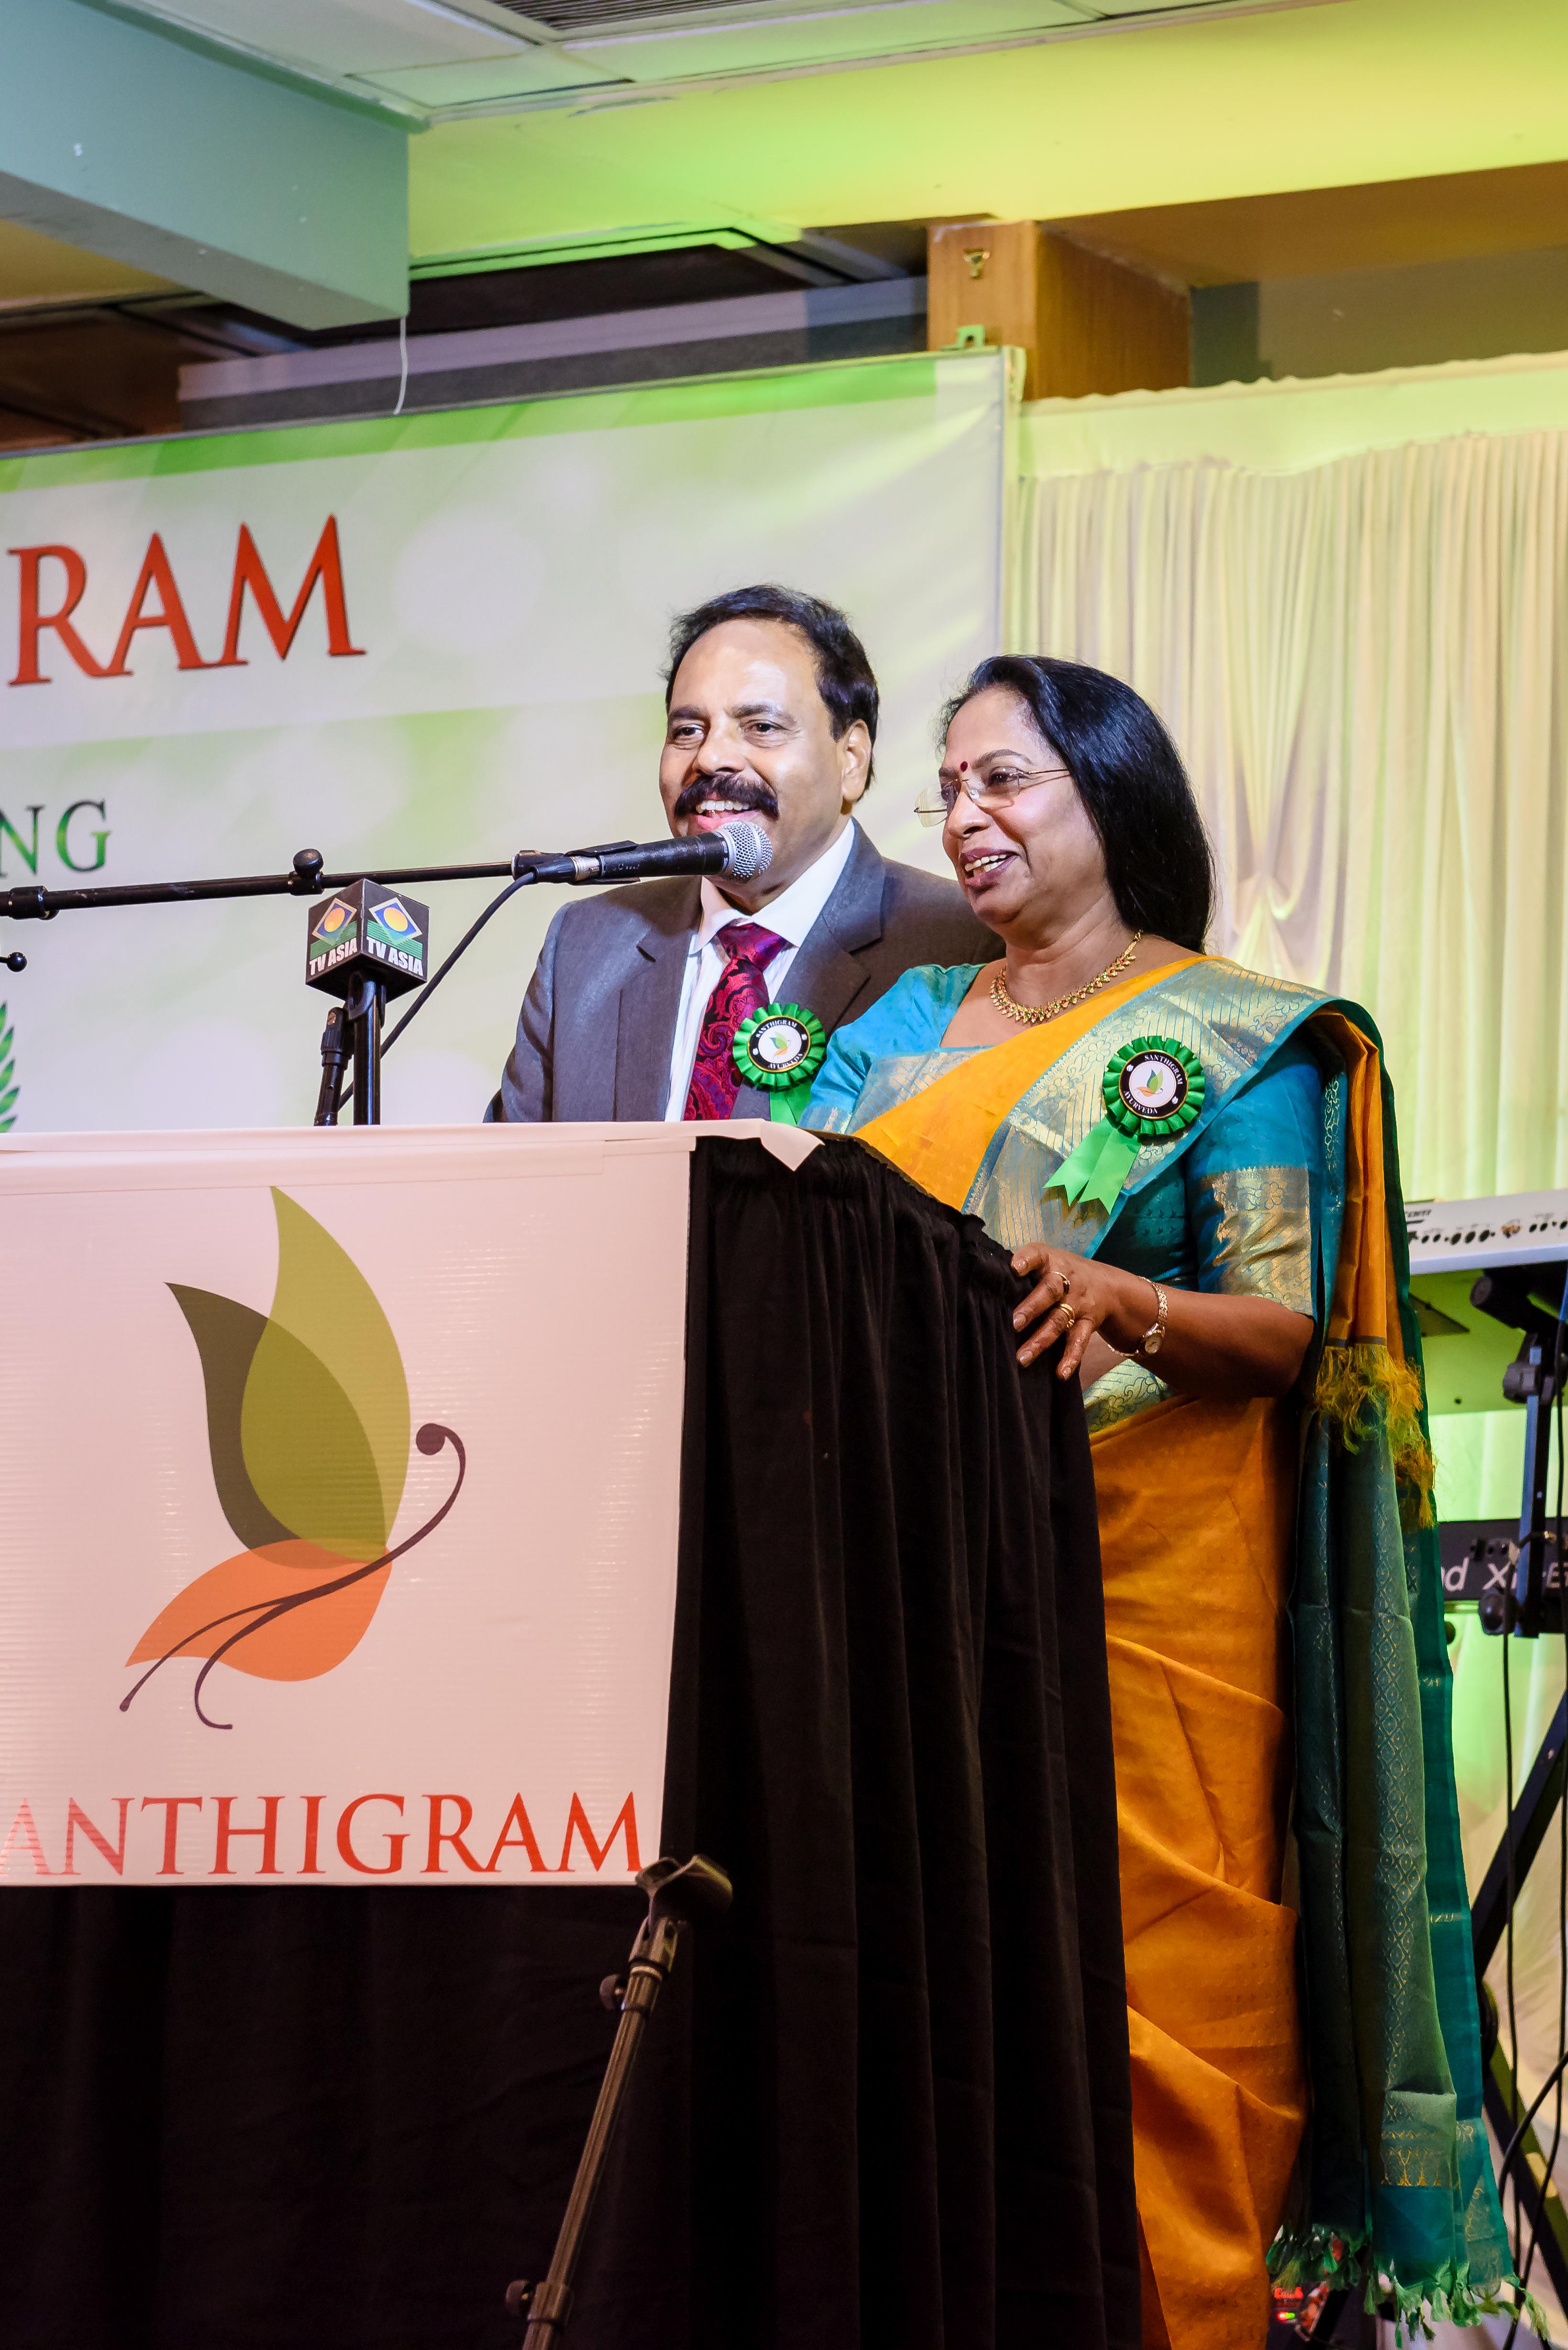 Santhigram Founders Dr. Gopinathan & Ambika Nair welcoming the guests